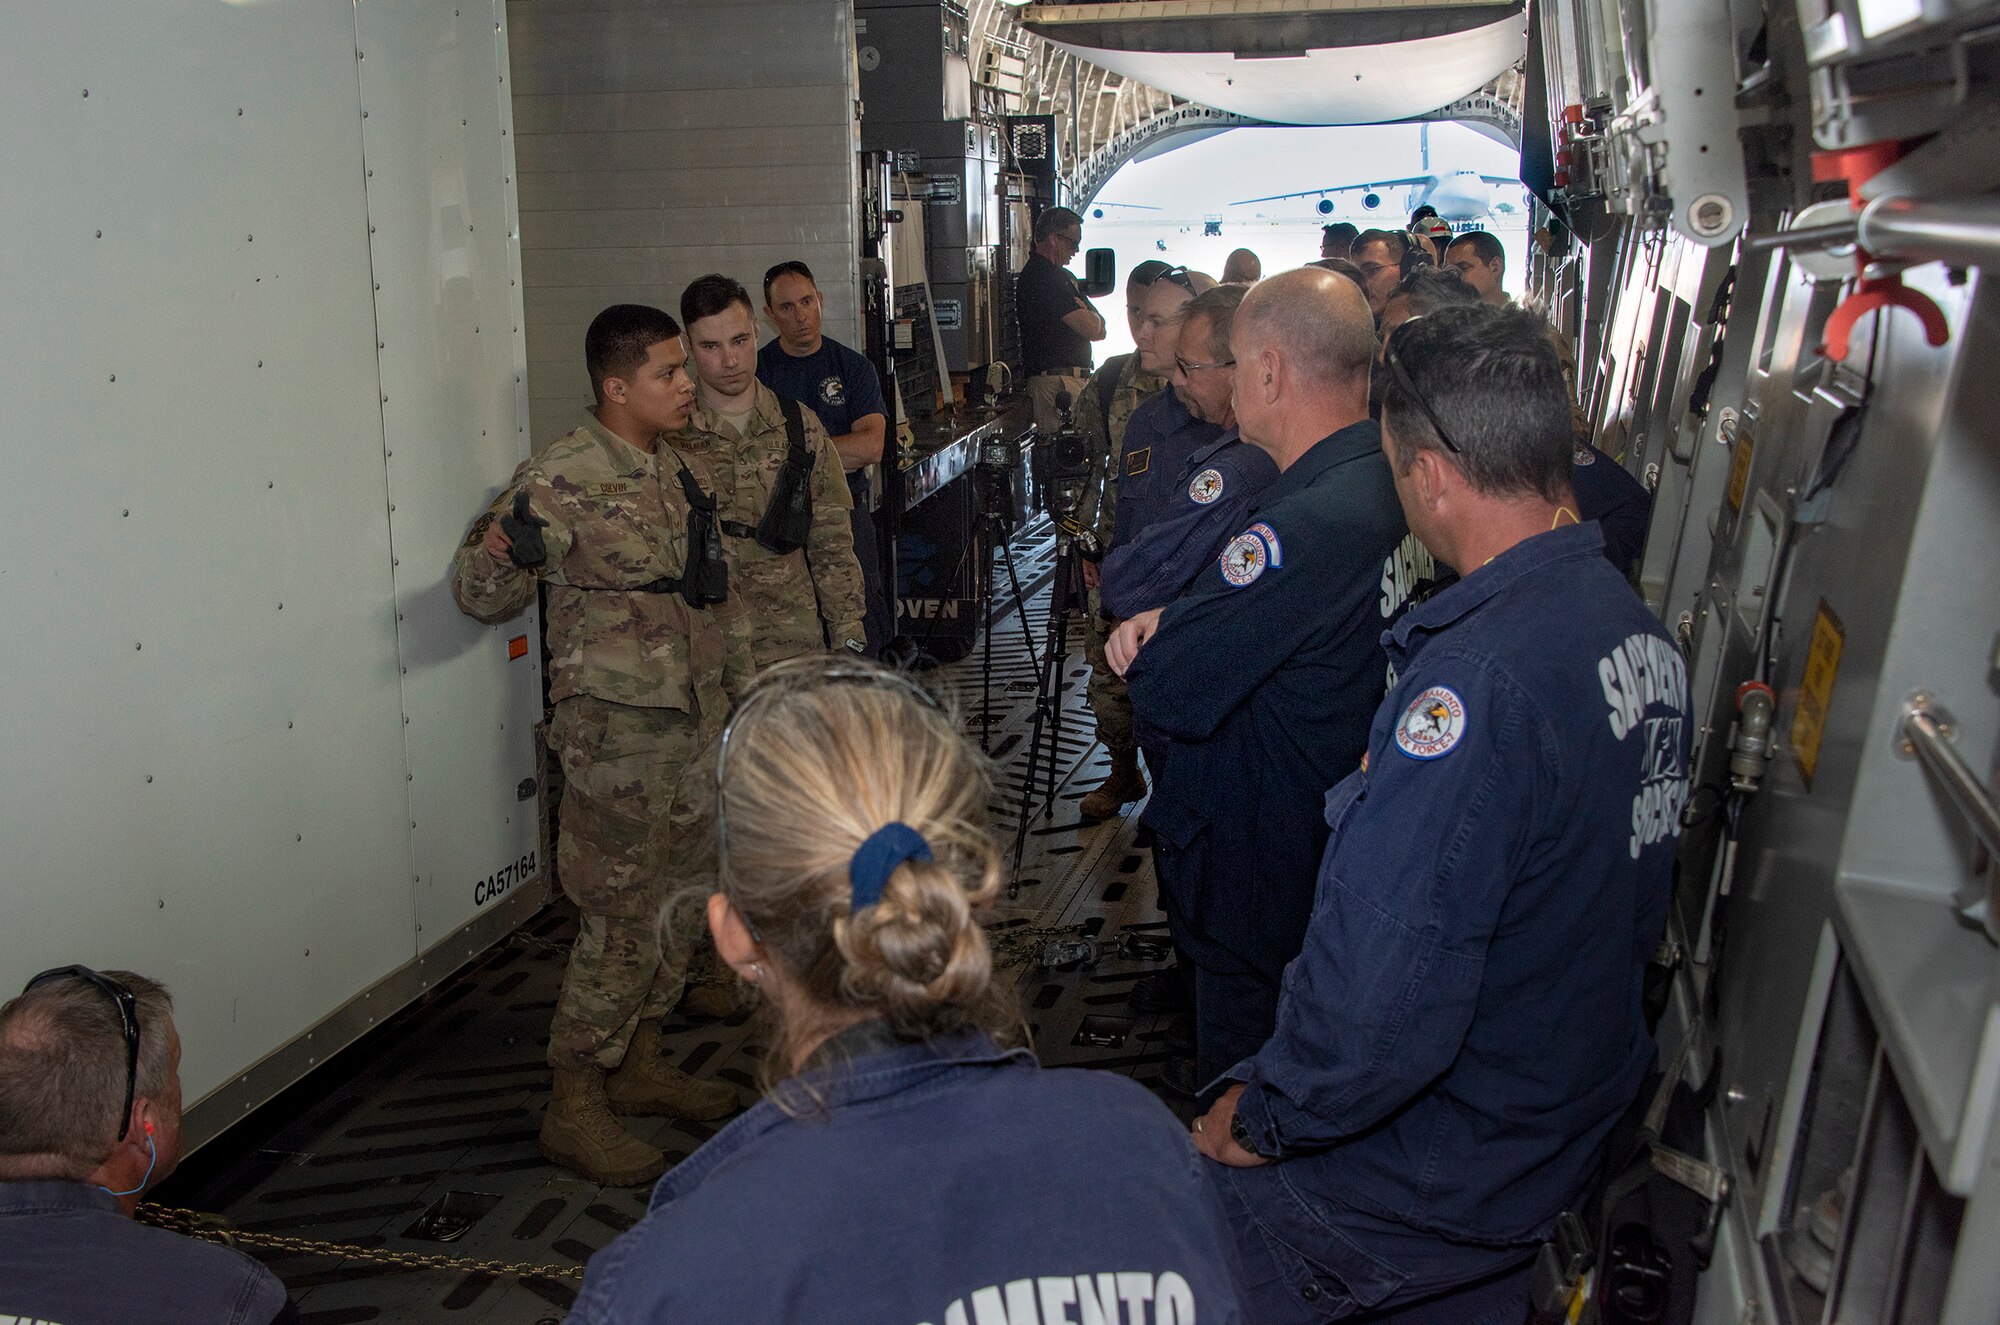 U.S. Air Force Senior Airman Edward Colvin, left, 60th Aerial Port Squadron expeditor, discuses cargo loading procedure with California Urban Search and Rescue Task Force 7 June 13, 2019, at Travis Air Force Base, California. The annual training helps members of CA TF-7 learn about the process, governing and directives and ensures cargo is safe before loading onto an aircraft.  (U.S. Air Force photo by Heide Couch)